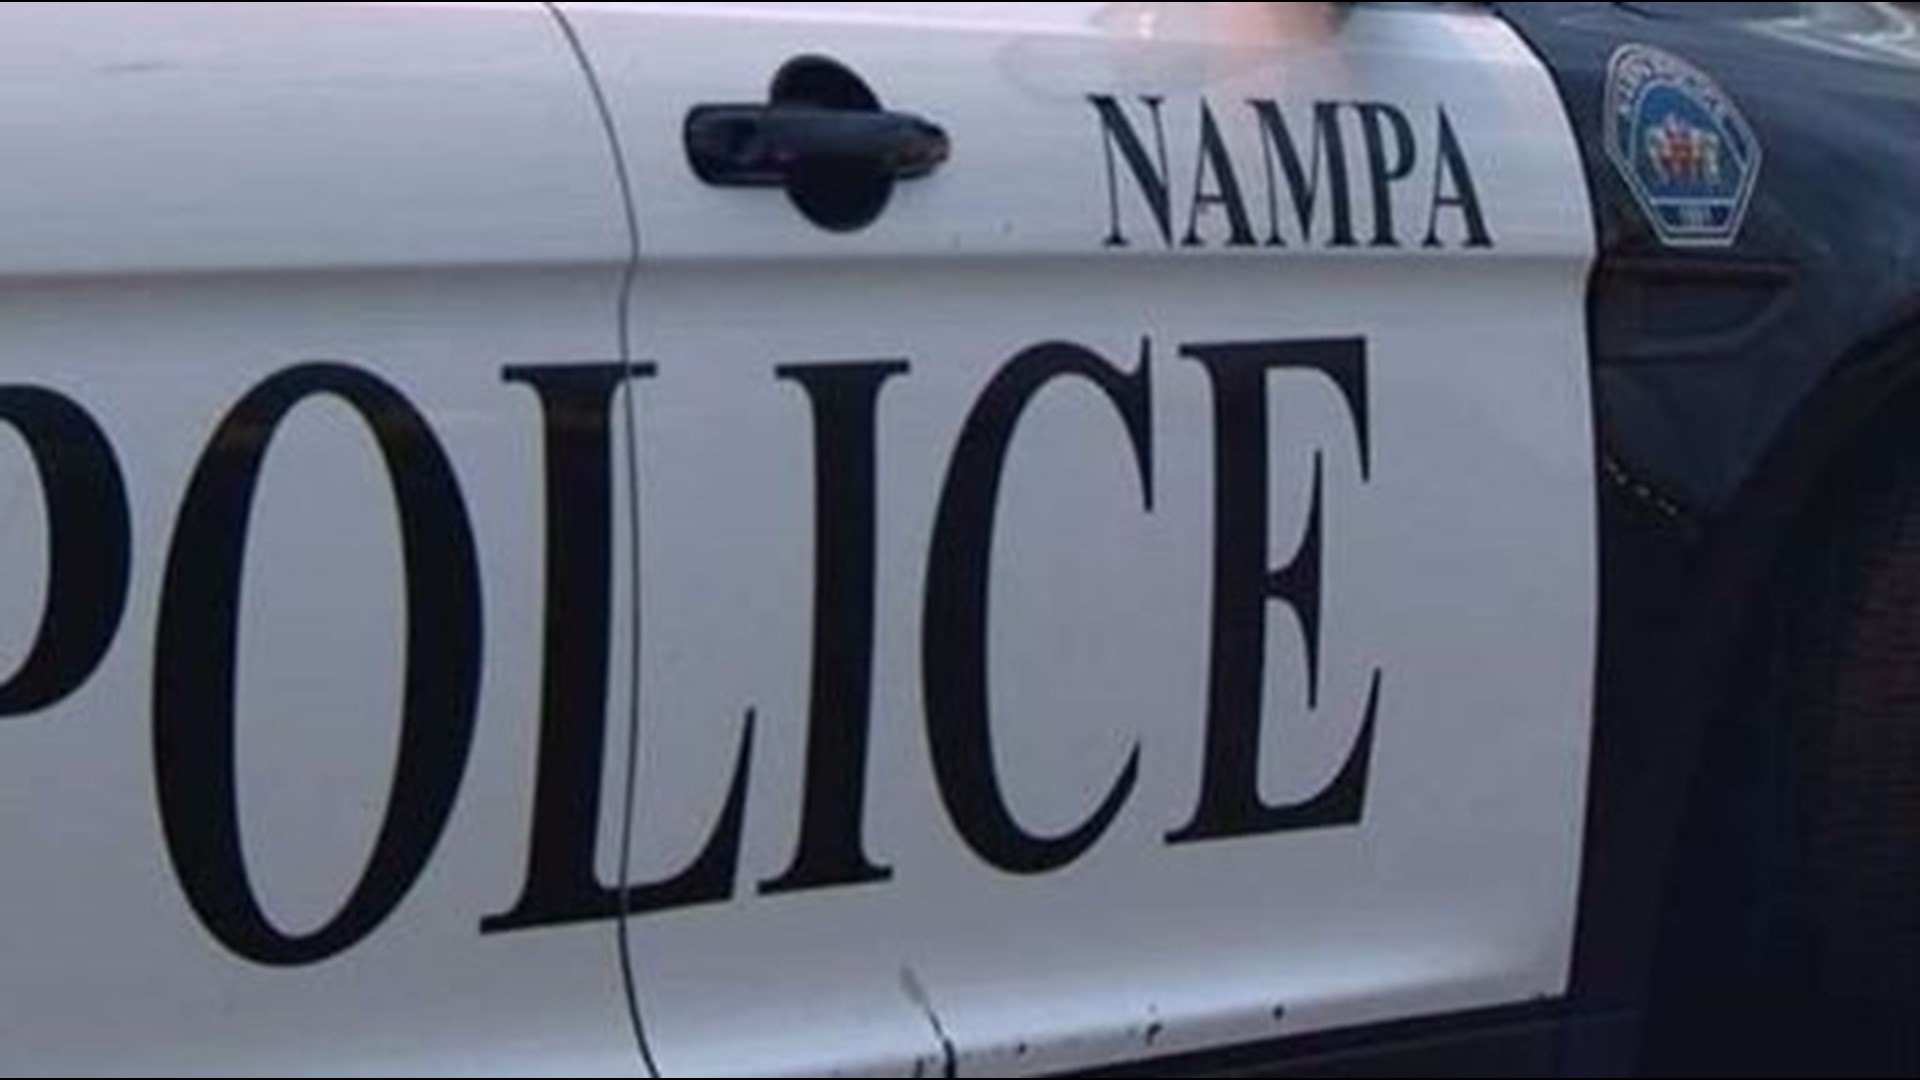 Police on Tuesday said the woman was in the road when she was hit and killed by two vehicles early Sunday morning in Nampa. Both drivers have been identified.